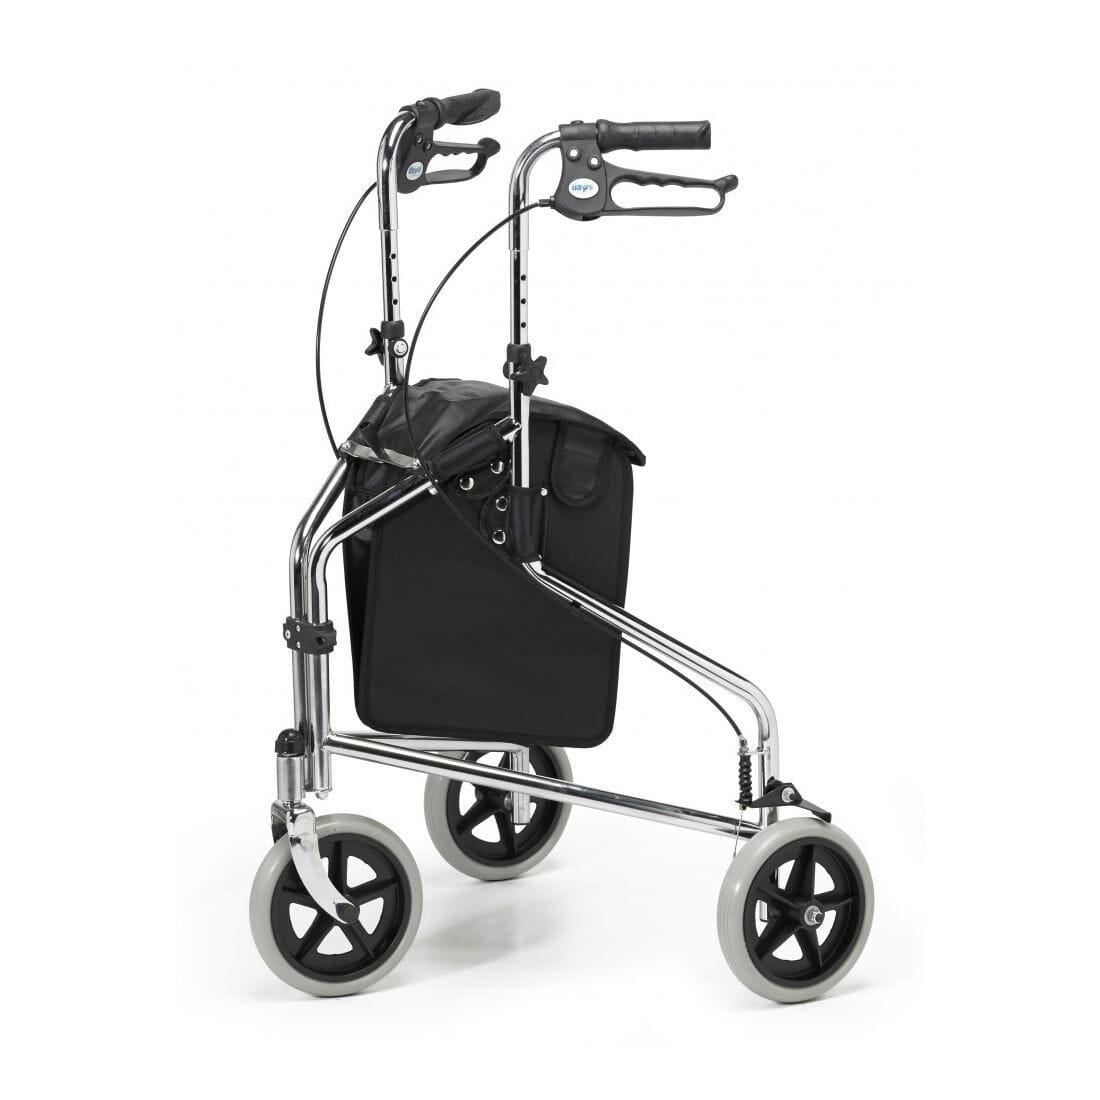 View Days Tri Wheel Walkers with Loop Lockable Brakes Chrome Plated information